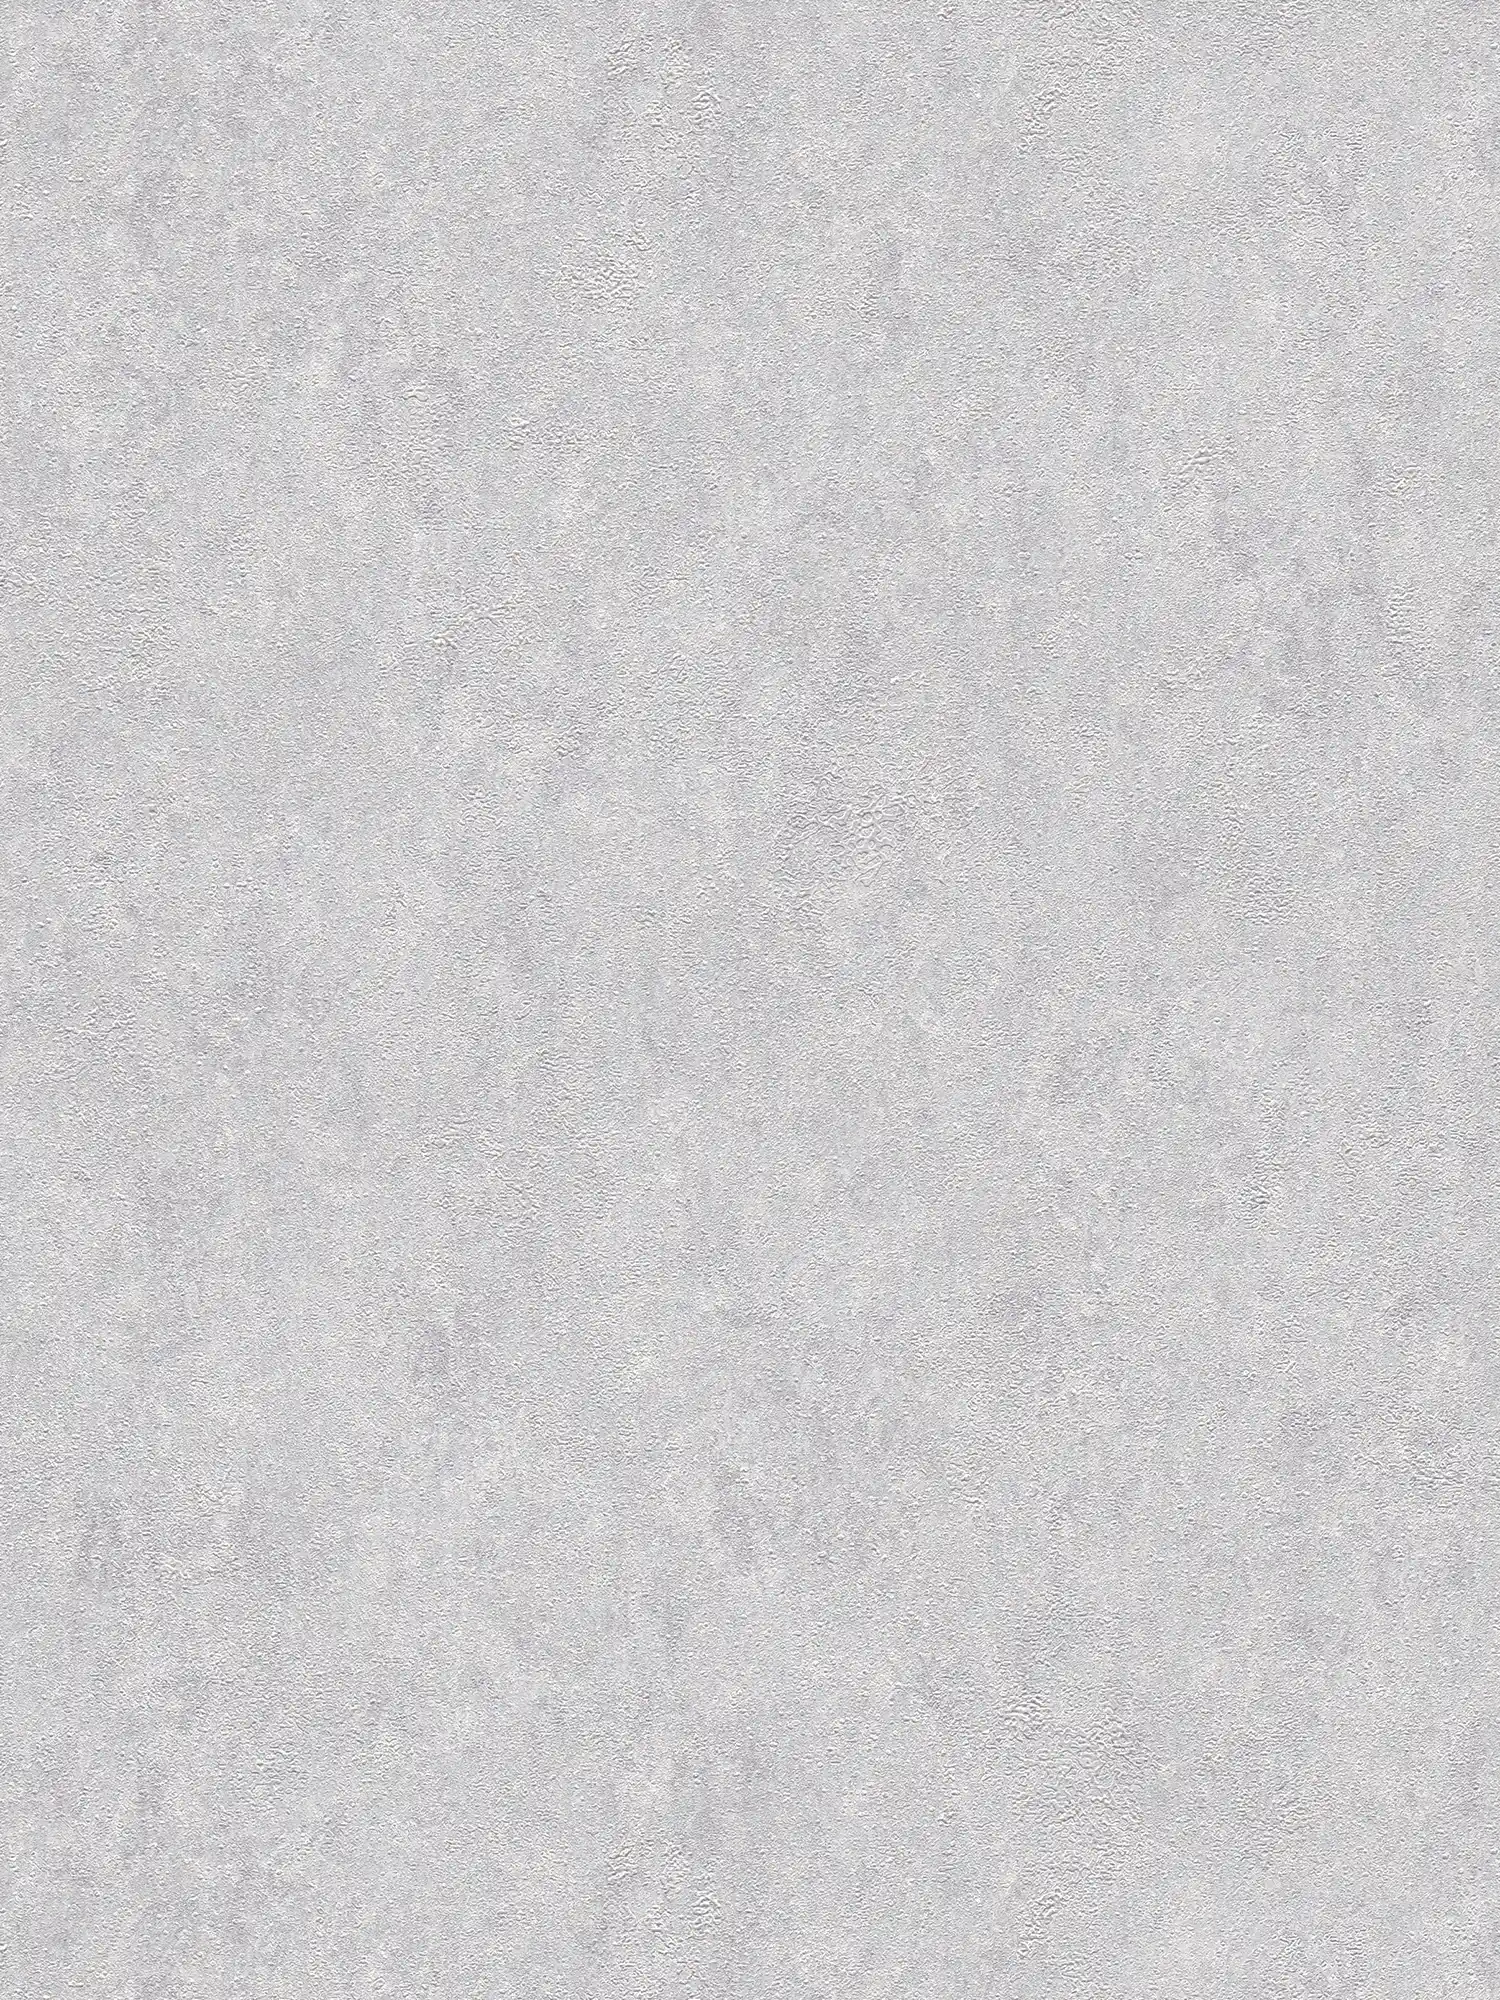 Plain textured wallpaper glossy with metallic effect - grey, silver
